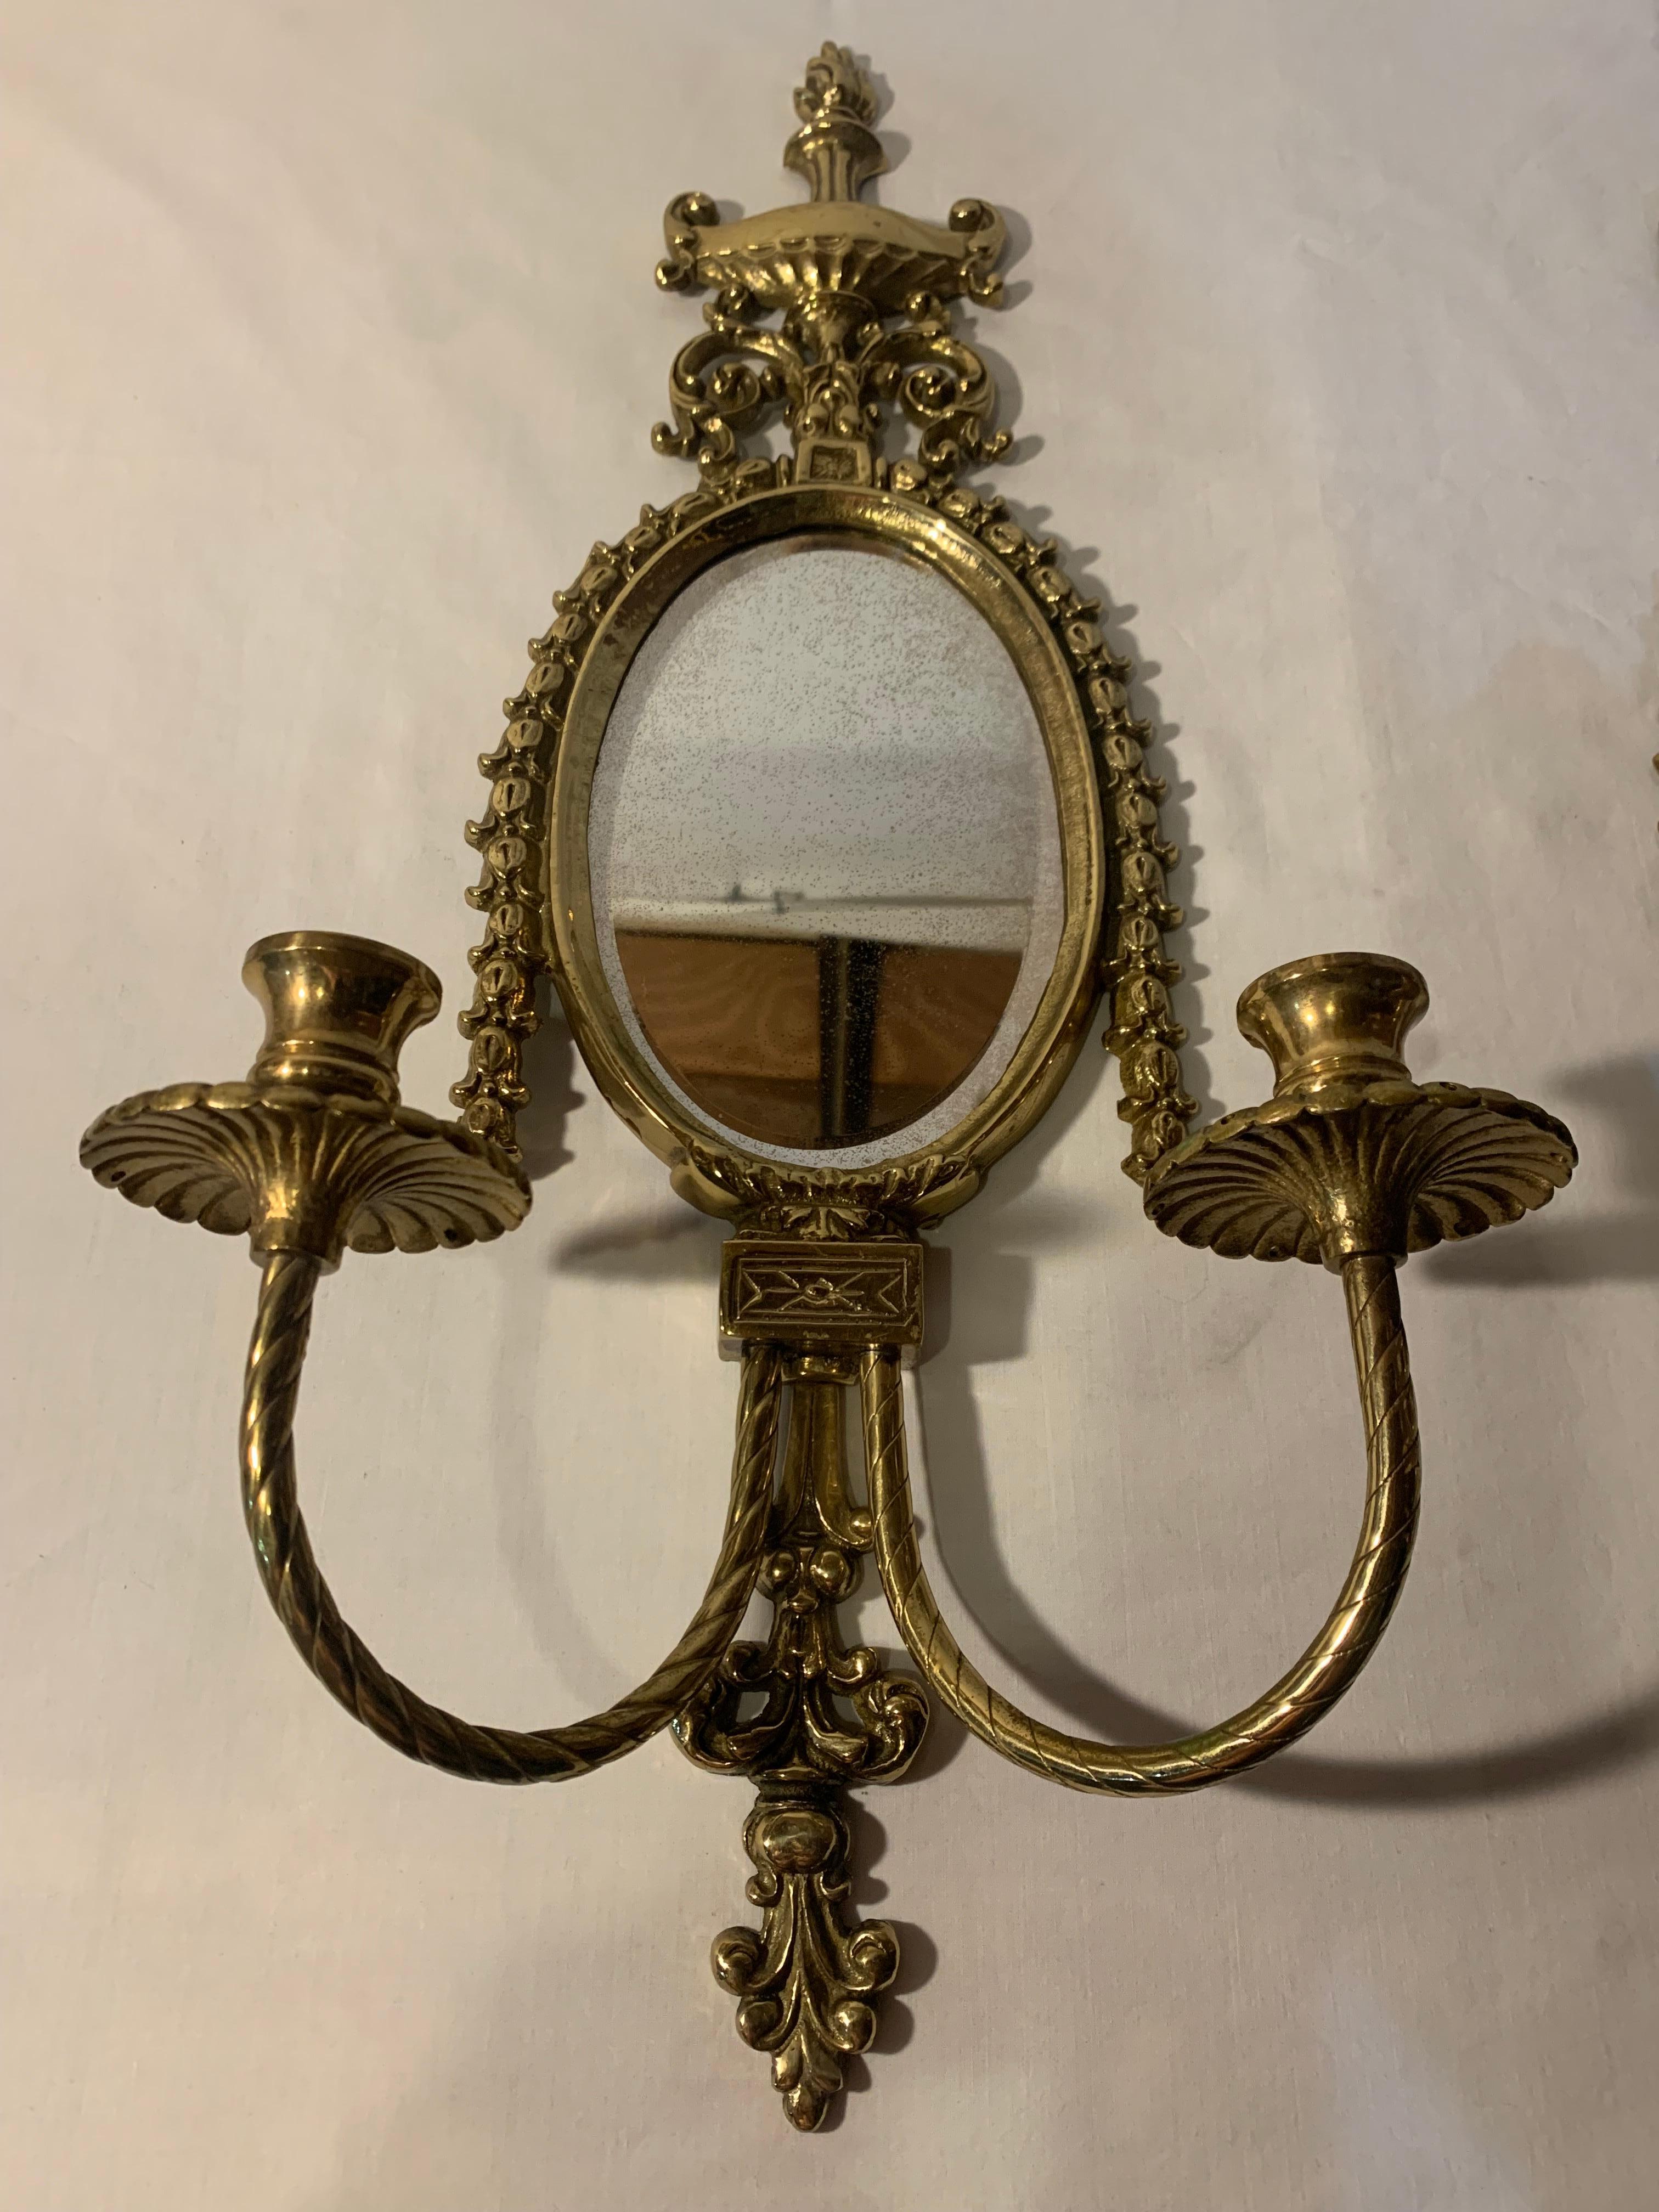 This is for a pair of vintage wall sconce candle holders with beveled mirrors. These are a brass tone metal and marked Glo-Mar Artworks Inc NY on the back. Not sure what the metal composition is but looks like a brass metal. These are 23